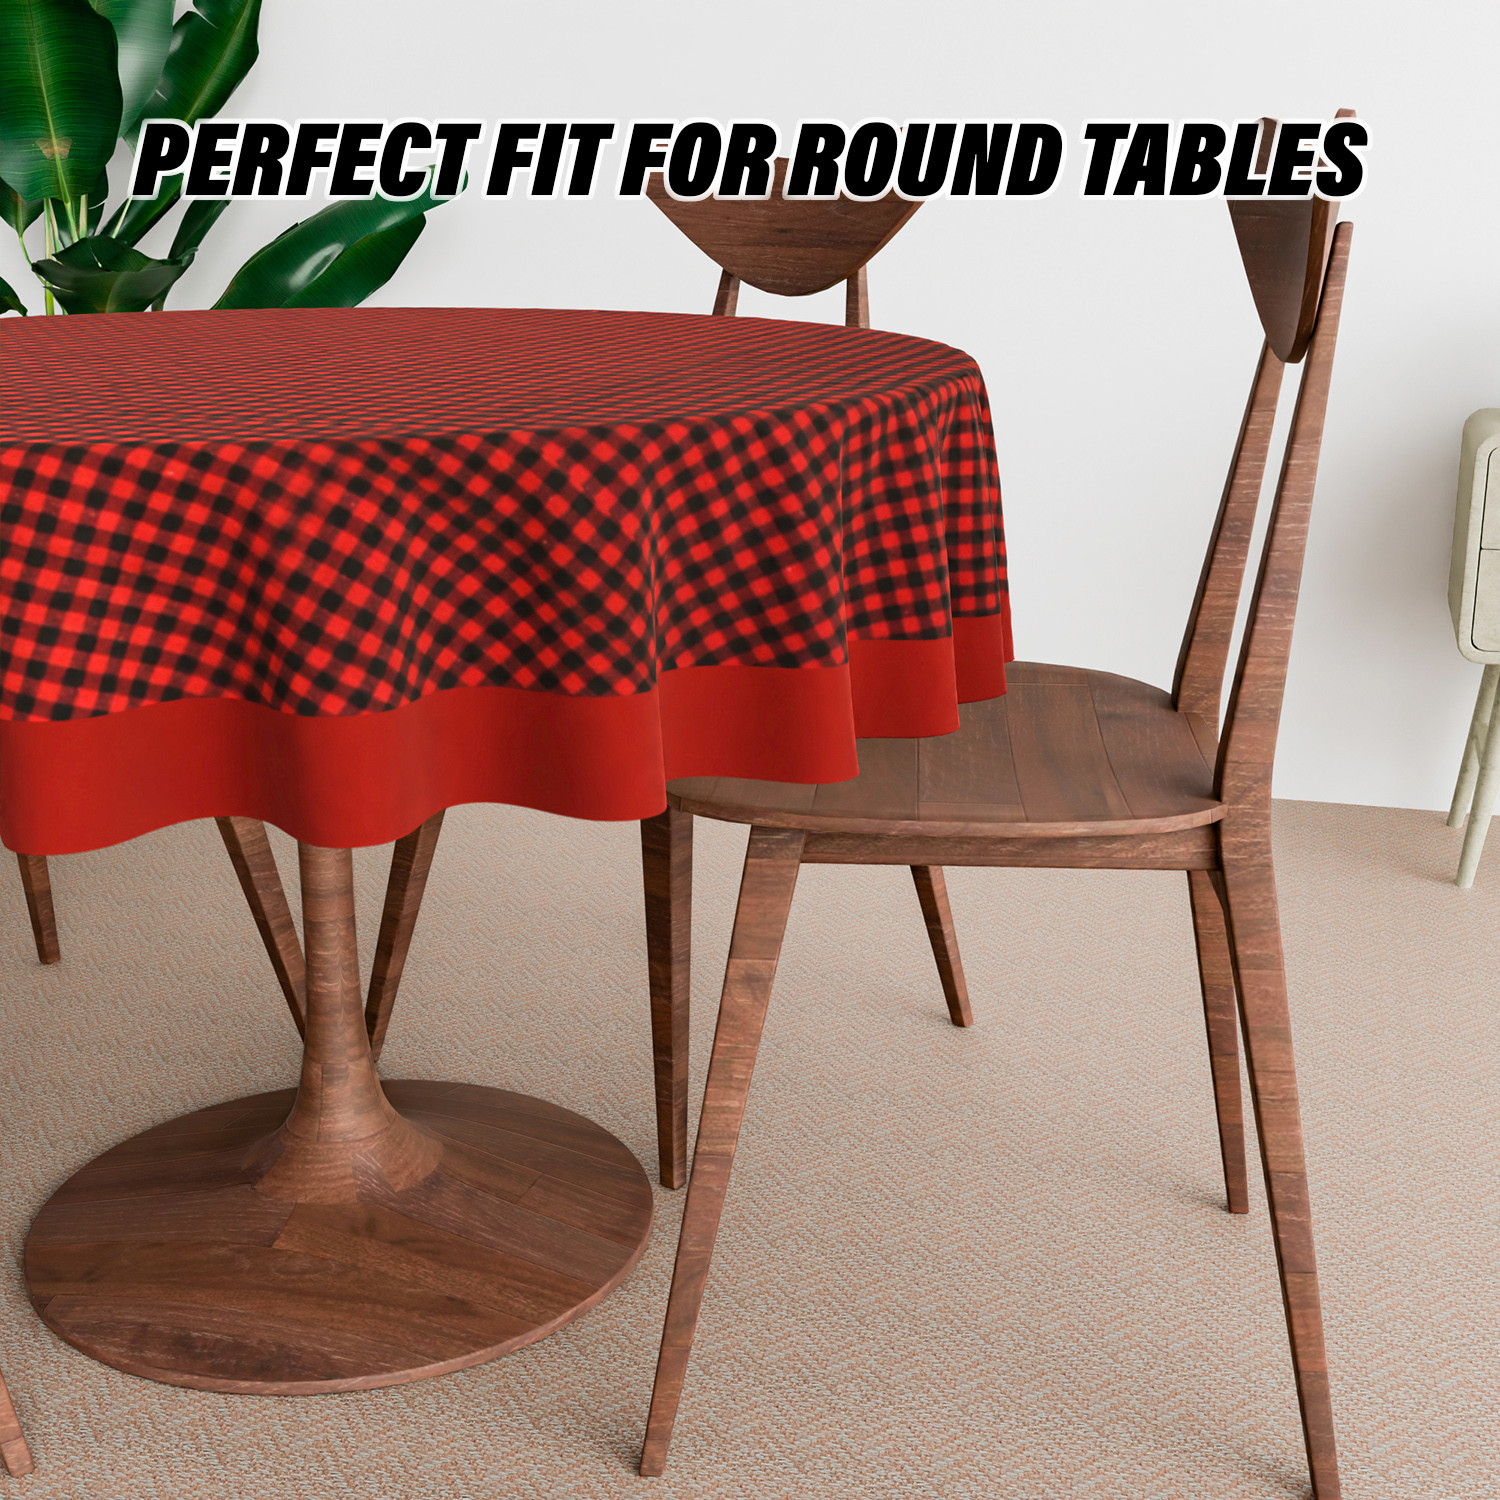 Kuber Industries Round Table Cover | Cotton Table Cloth for Round Tables | 4 Seater Round Table Cloth | Barik Check Kitchen Dining Tablecloth | Tabletop Cover | 60 Inch | Maroon